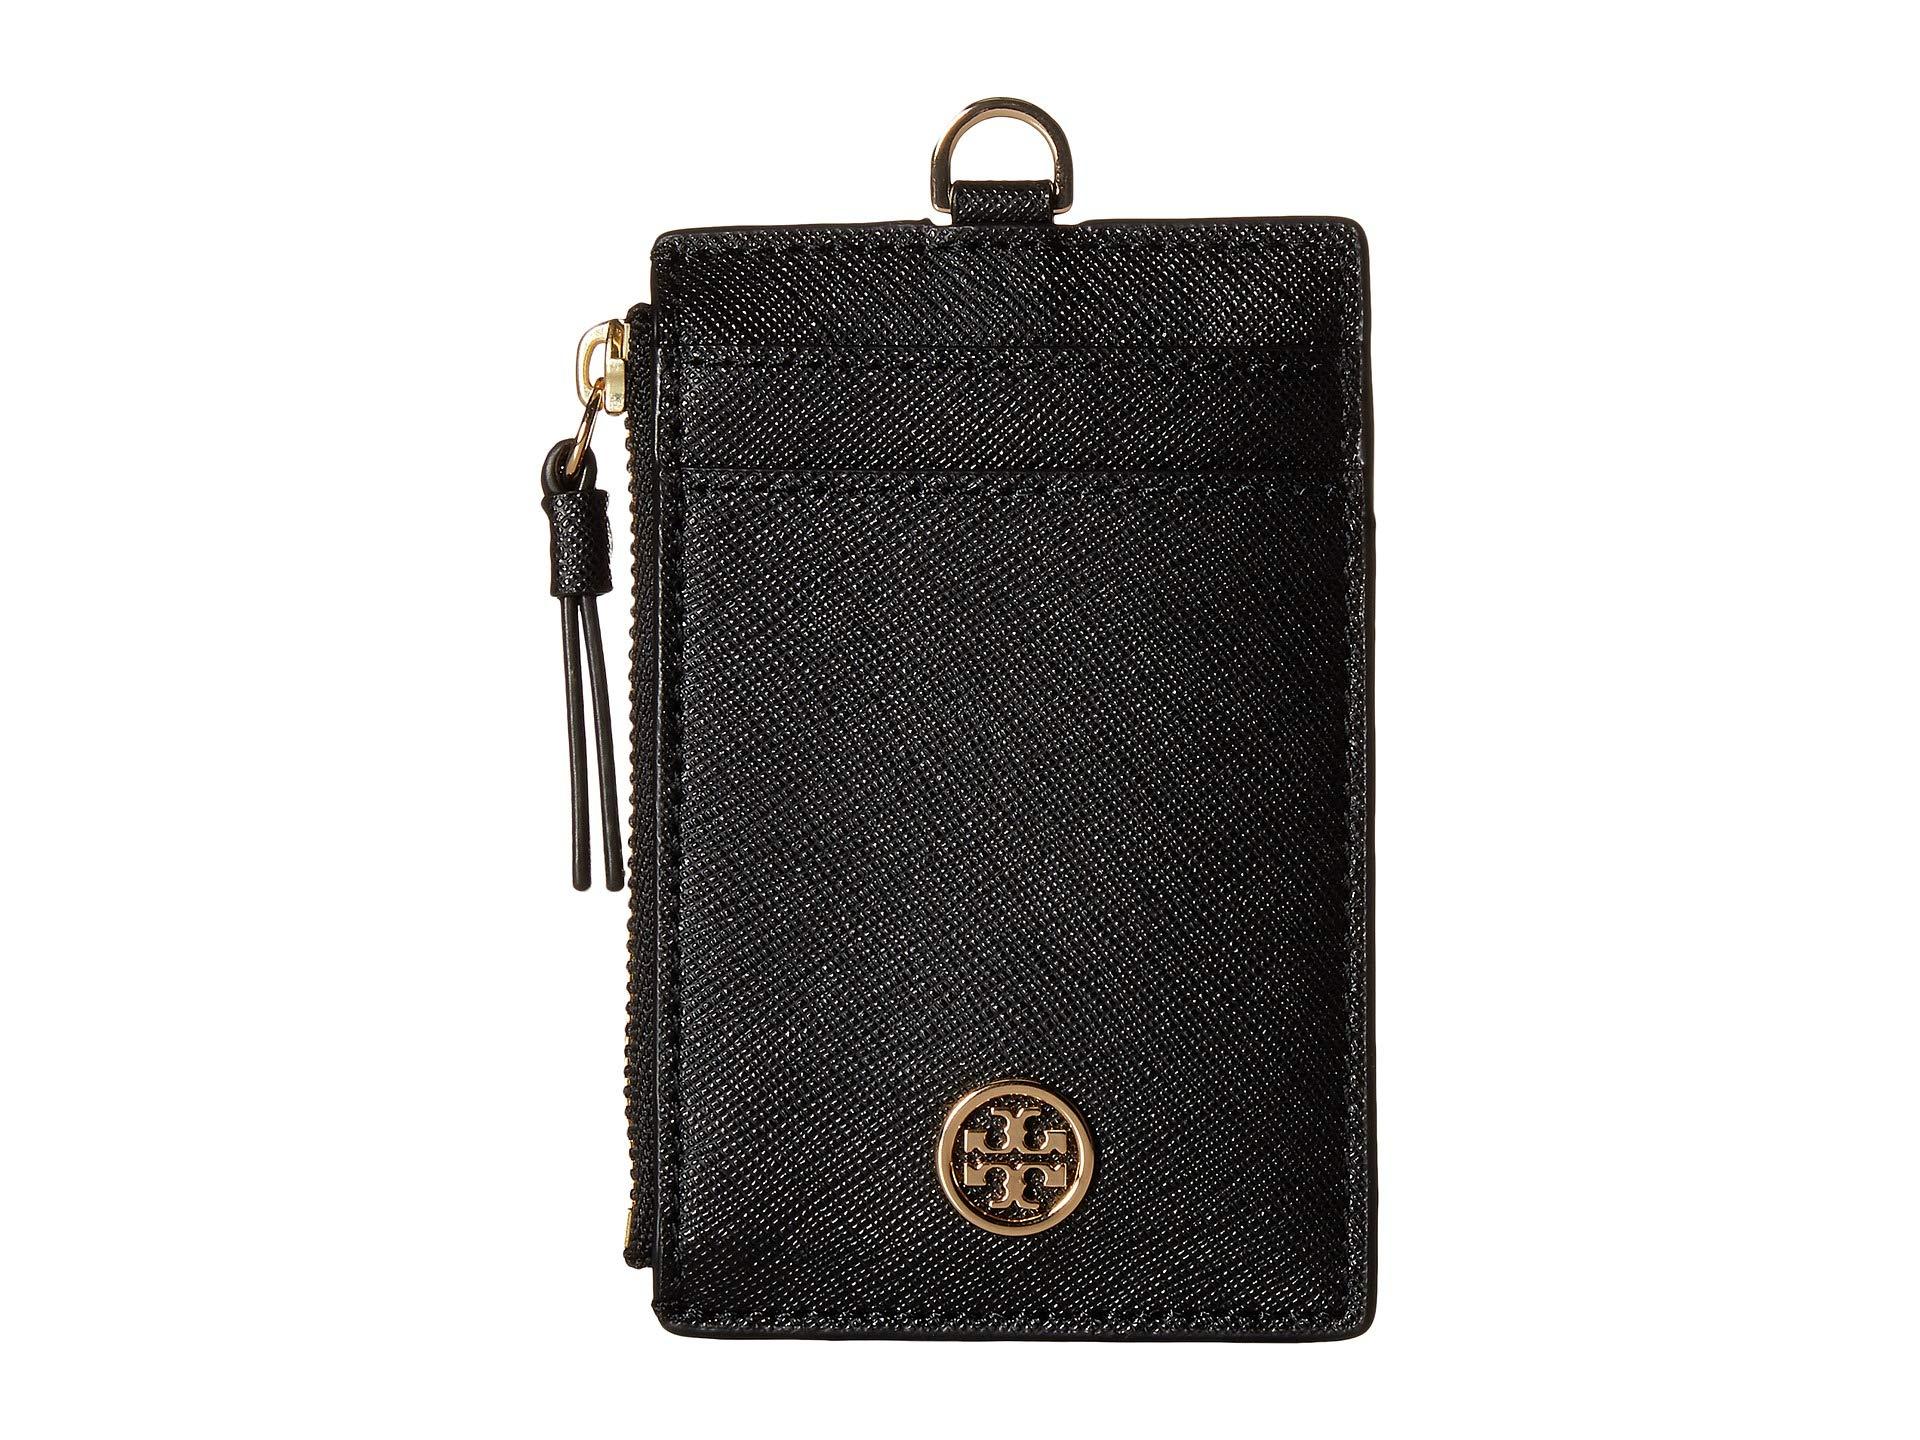 Tory Burch Leather Robinson Lanyard in Shell Pink/Gold (Black) | Lyst